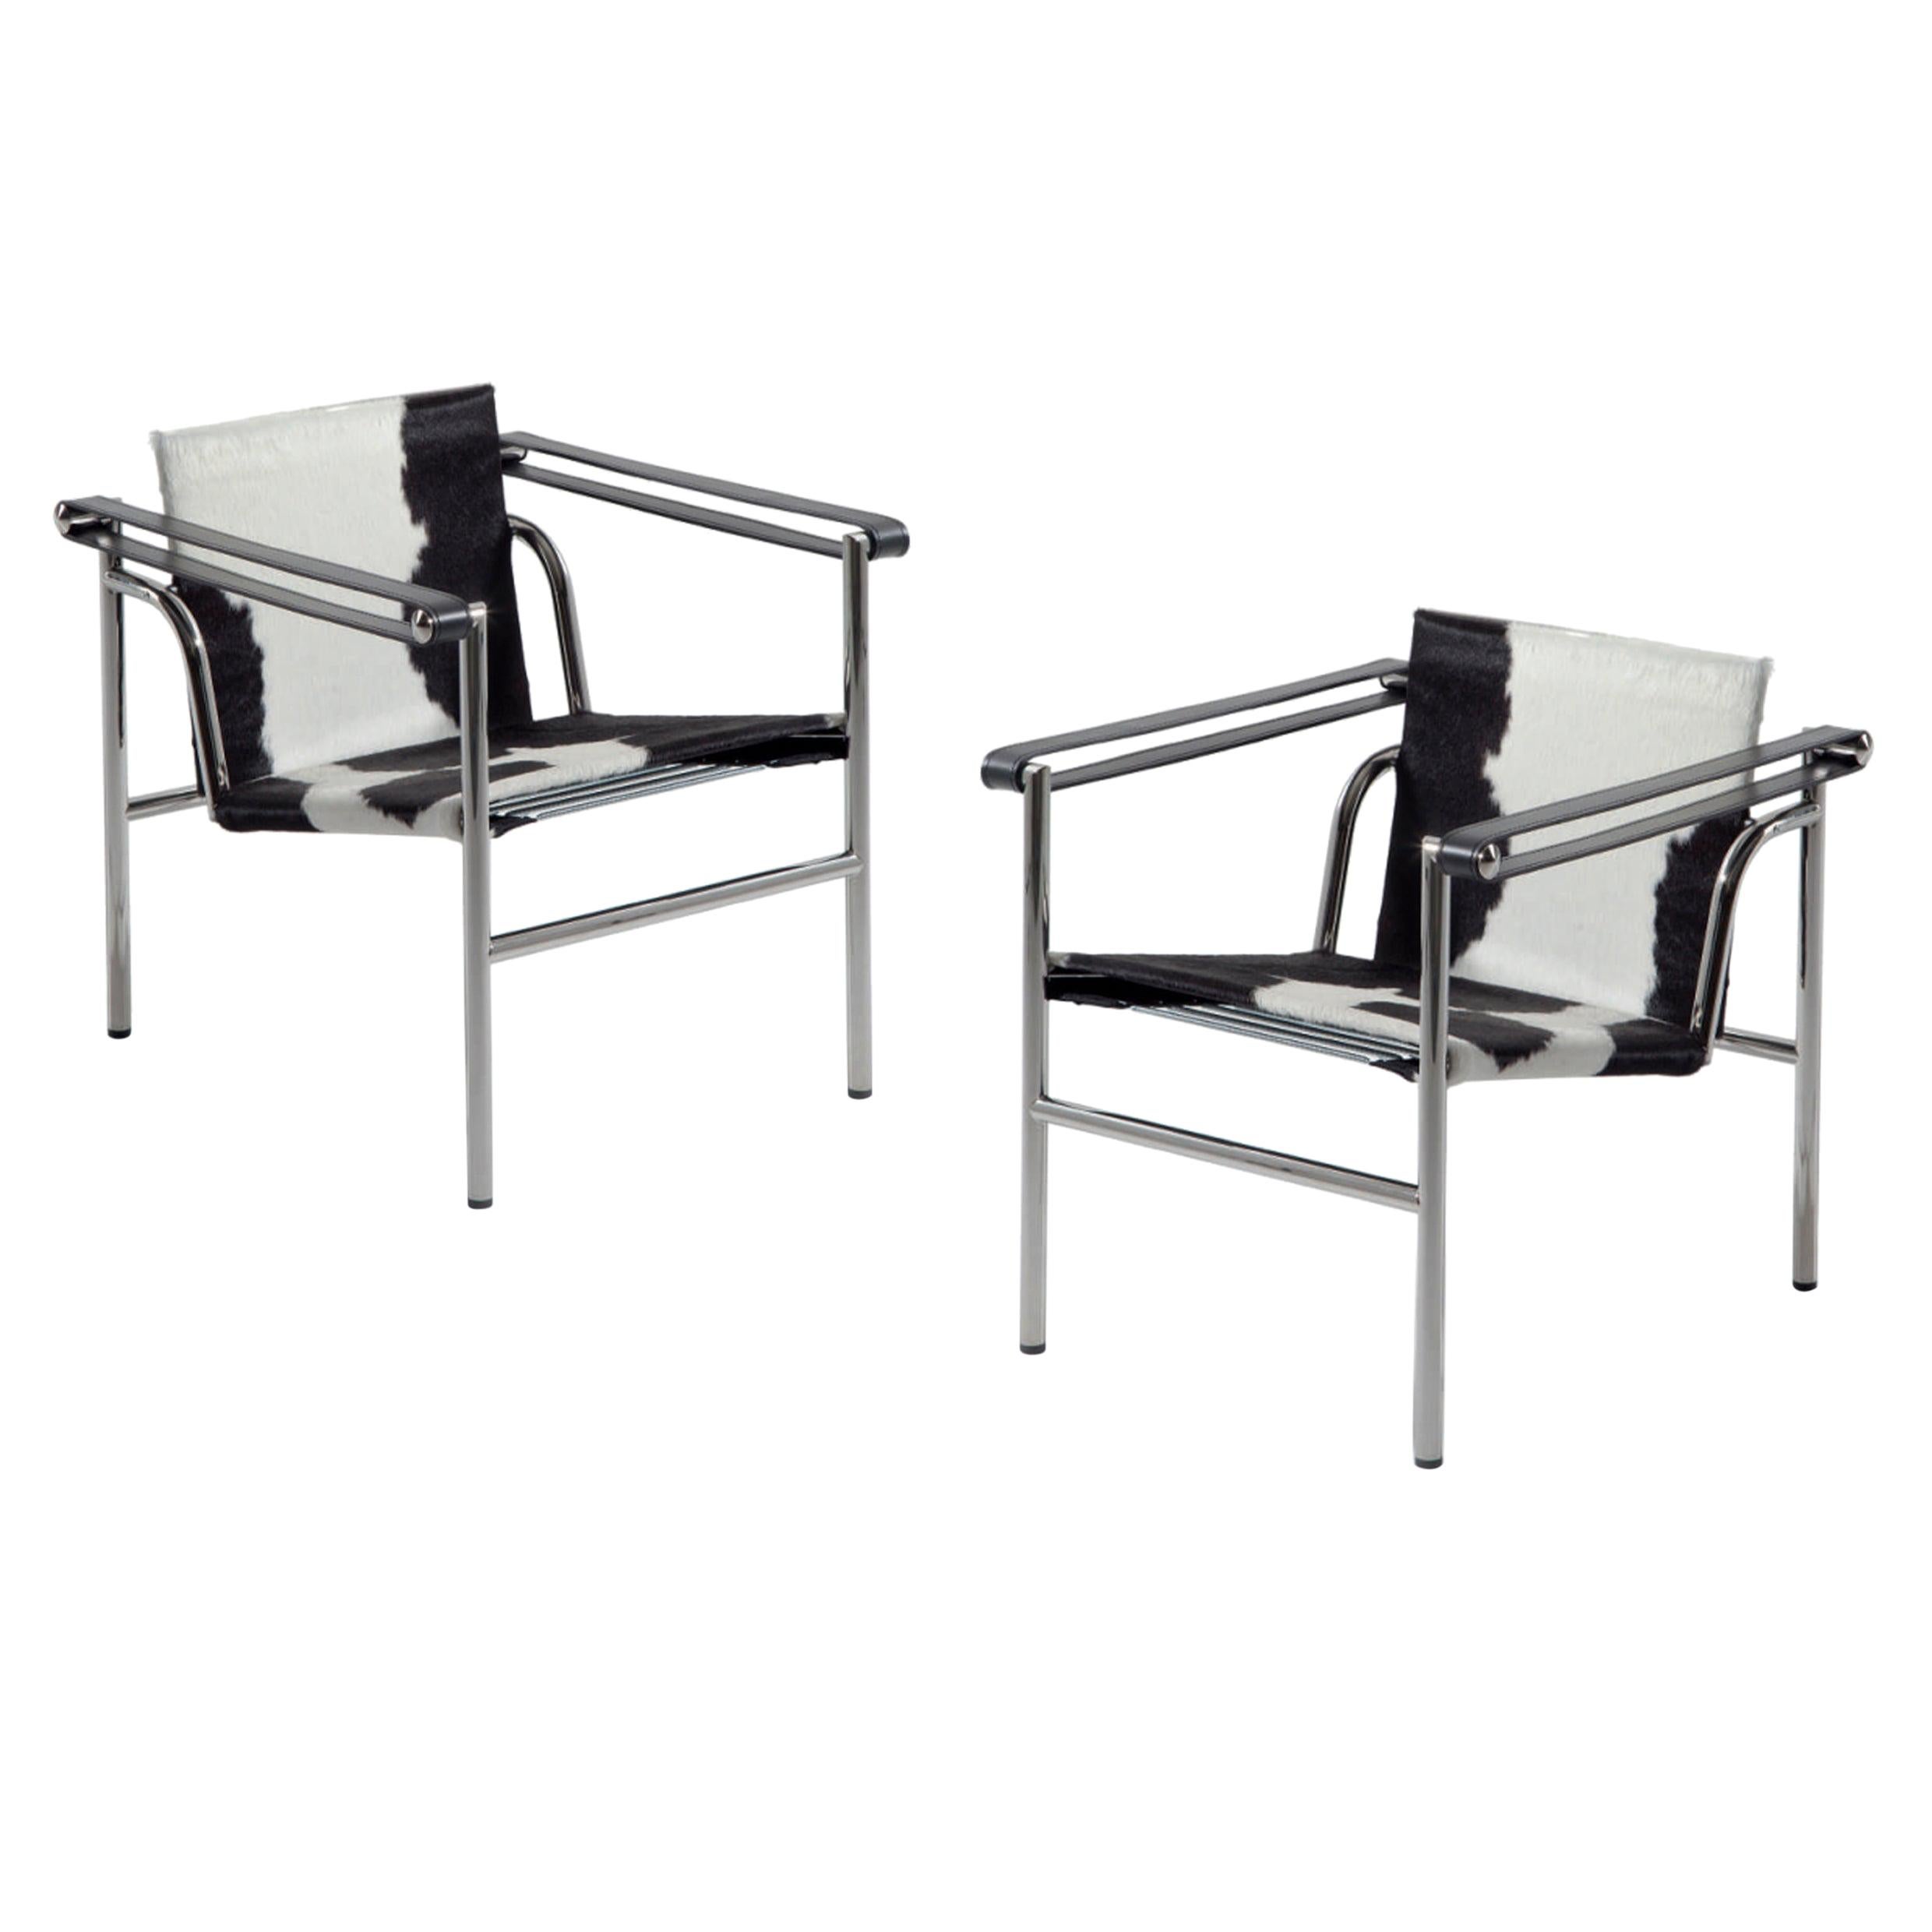 Set of Two Lc1 Chairs by Le Corbusier, Pierre Jeanneret, Charlotte Perriand